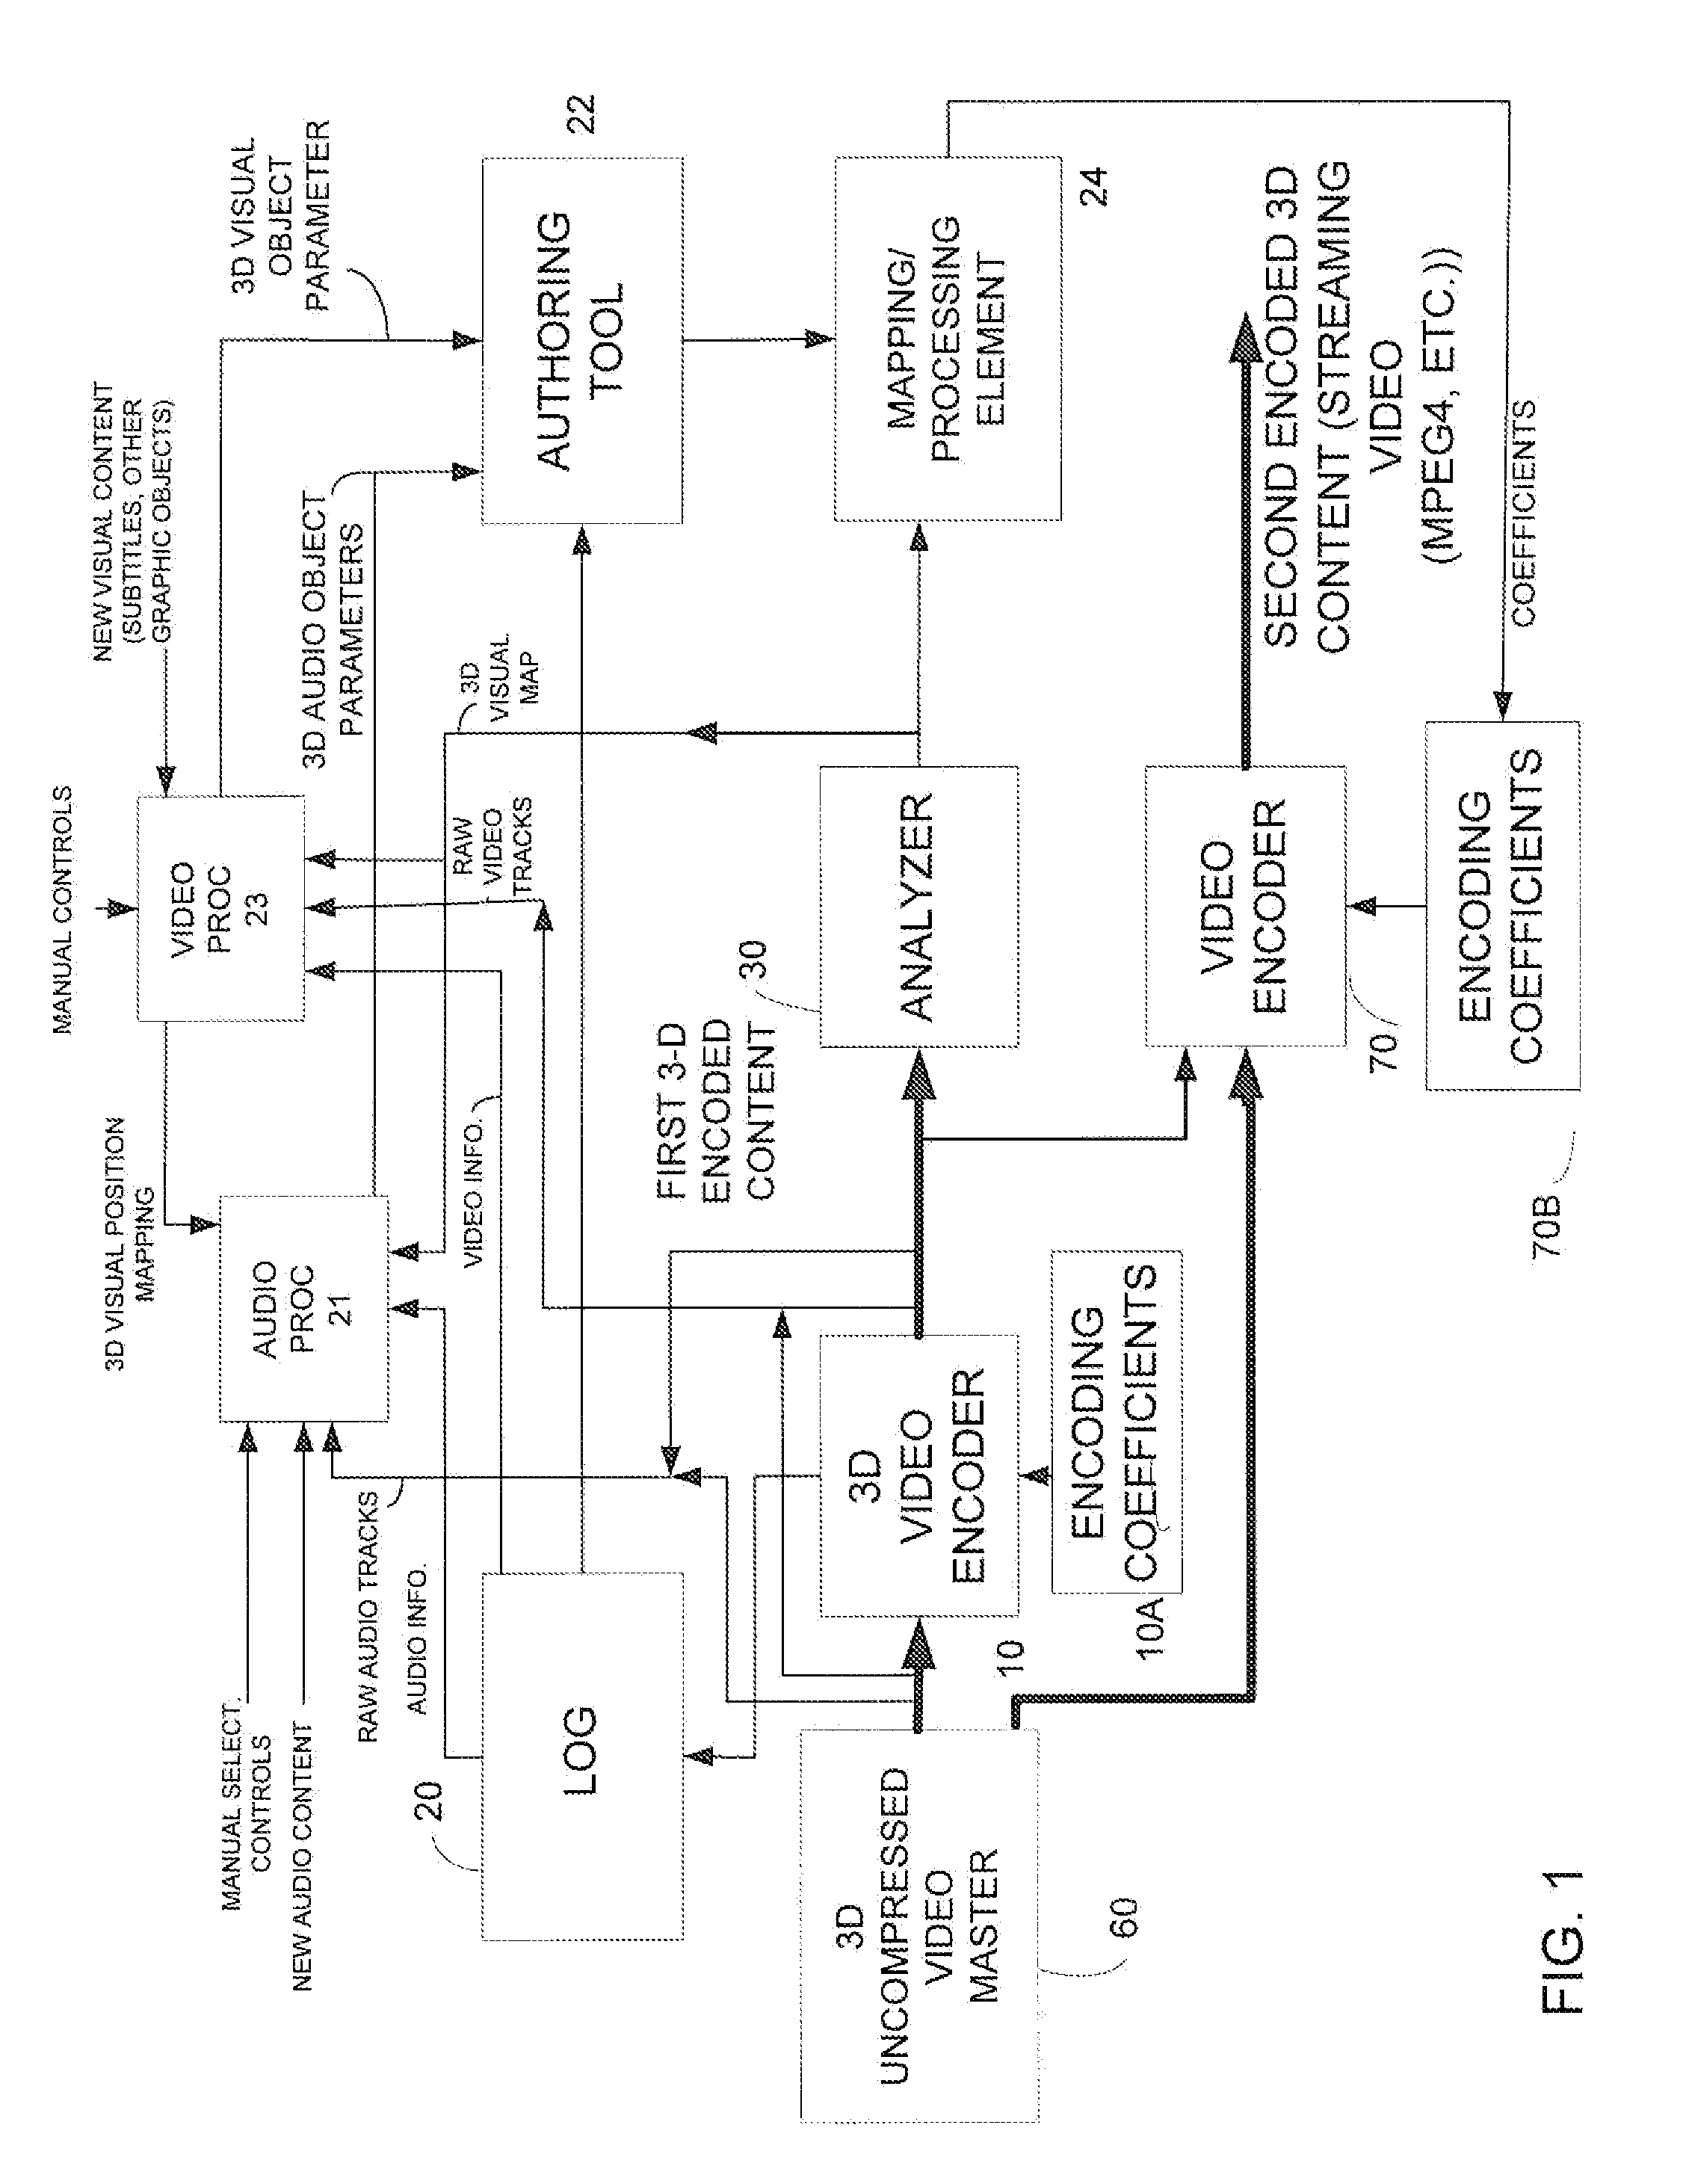 Method and Apparatus for Generating 3D Audio Positioning Using Dynamically Optimized Audio 3D Space Perception Cues